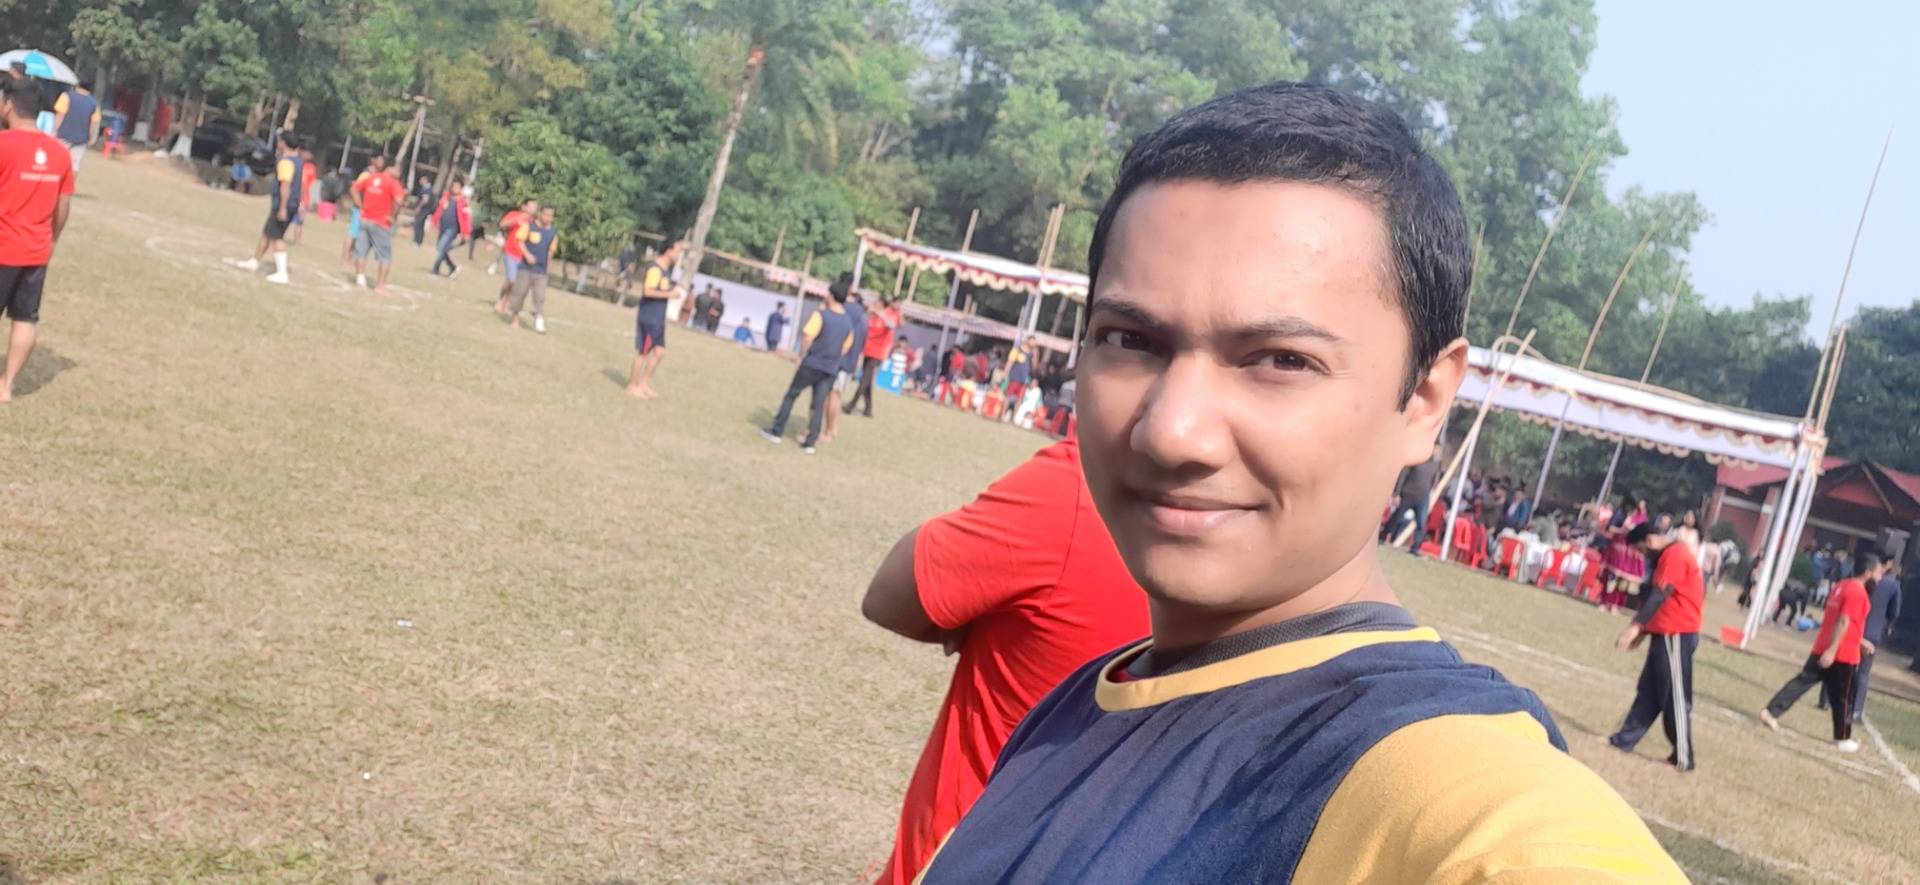 In the field during halftime of football match